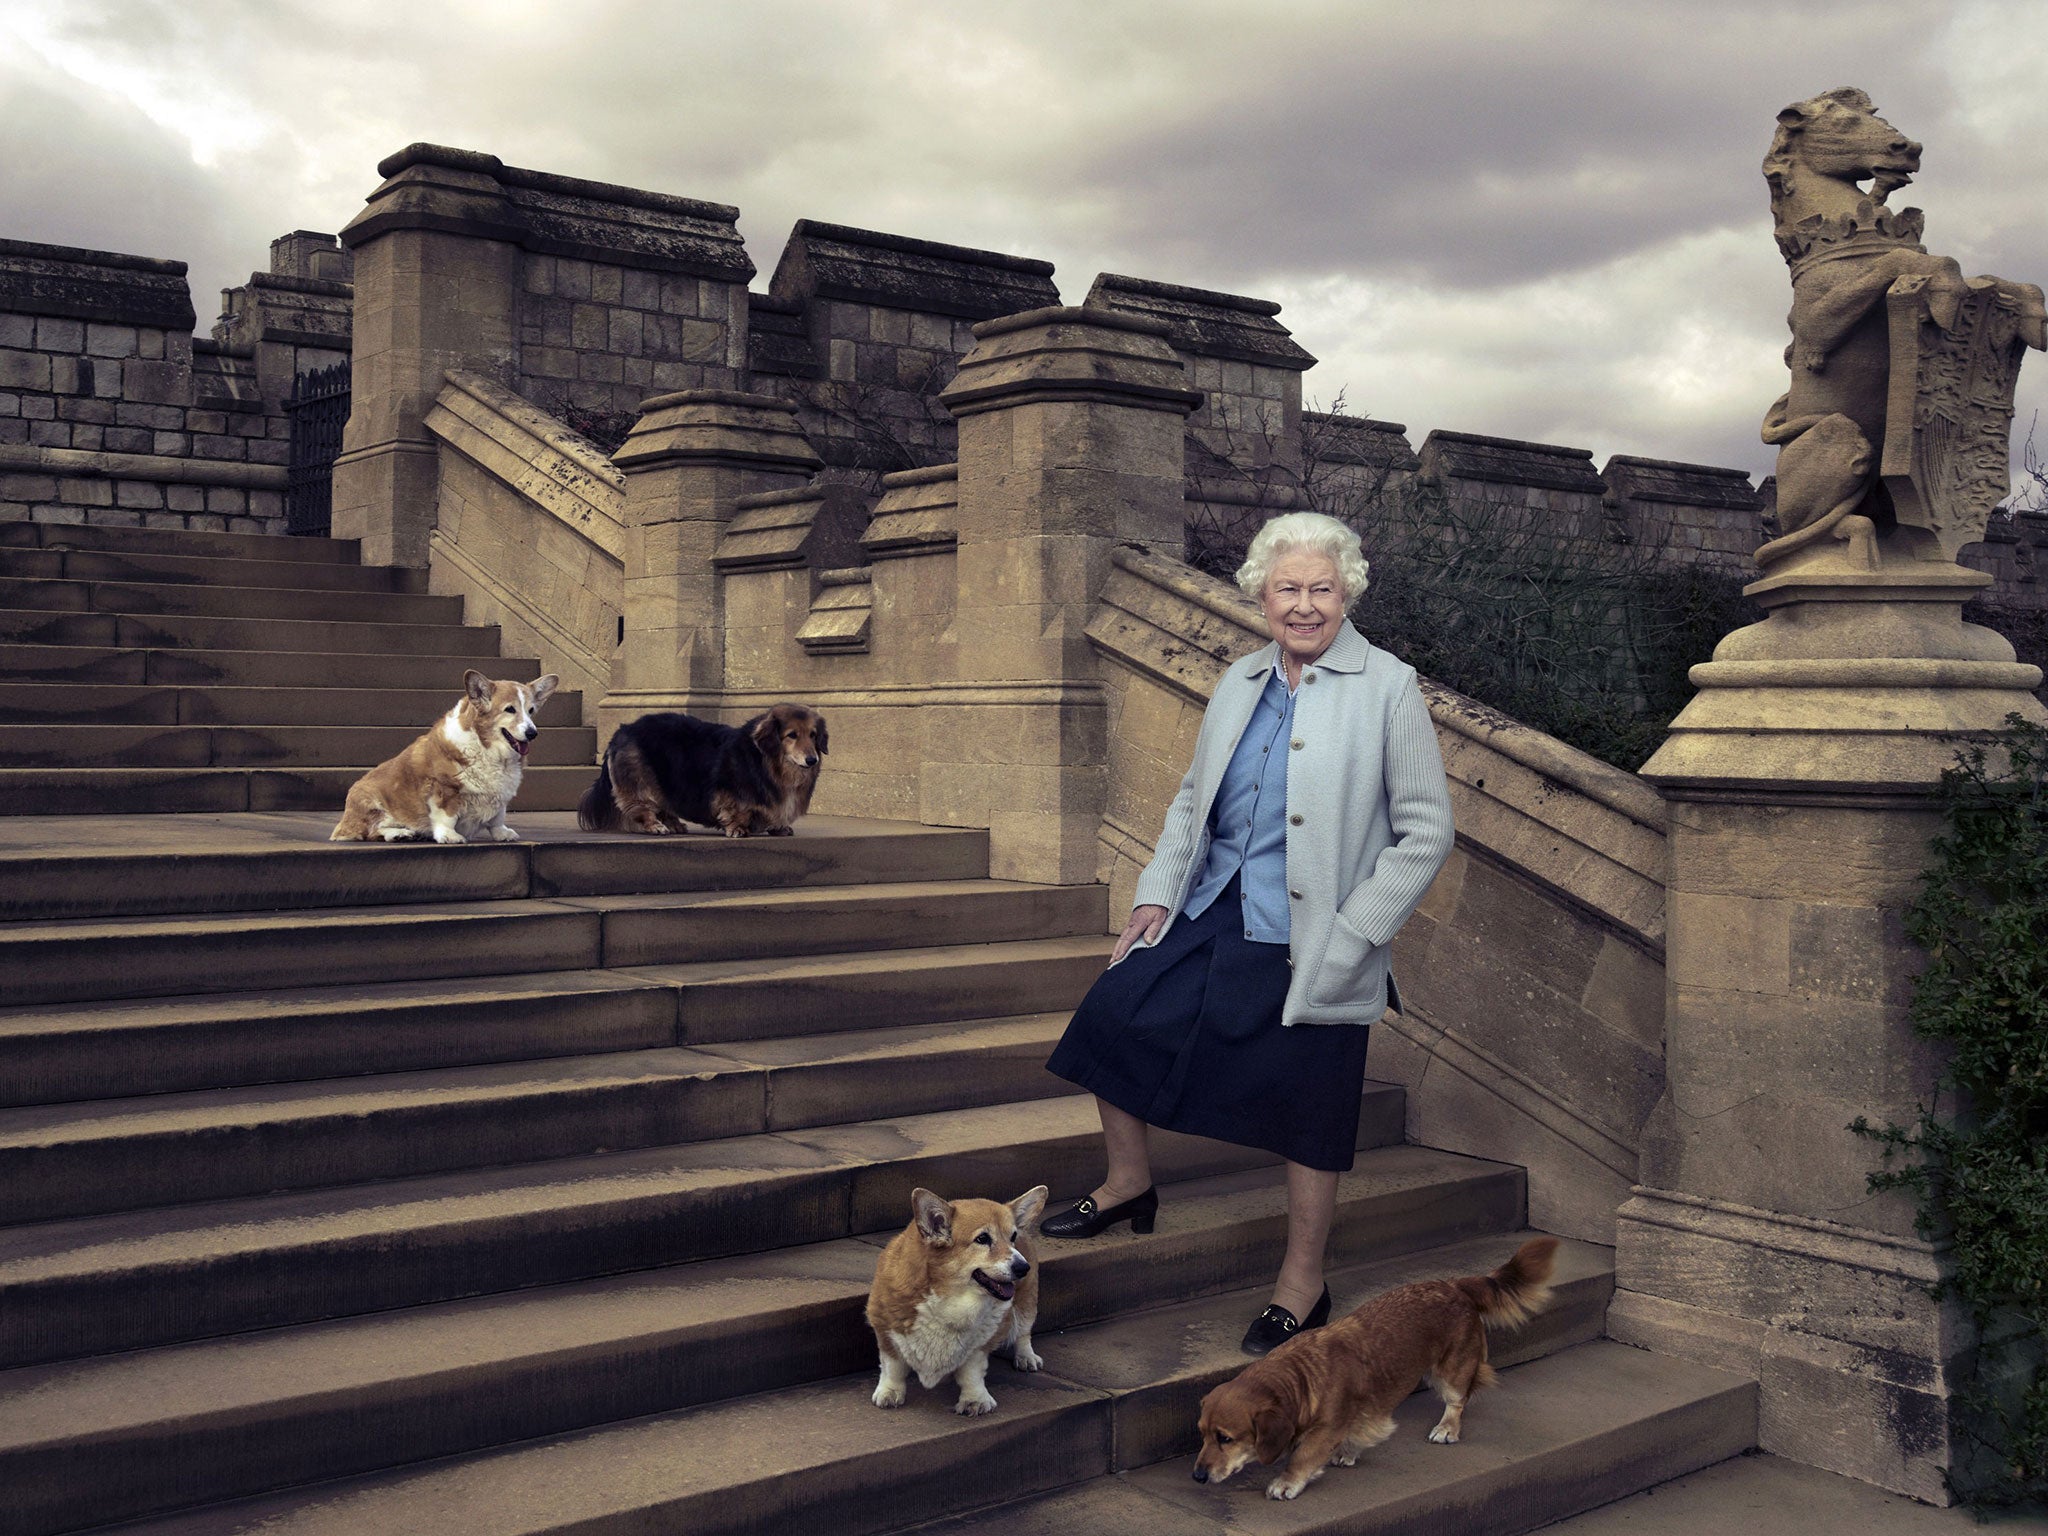 An official photograph of Queen Elizabeth II to mark her 90th birthday